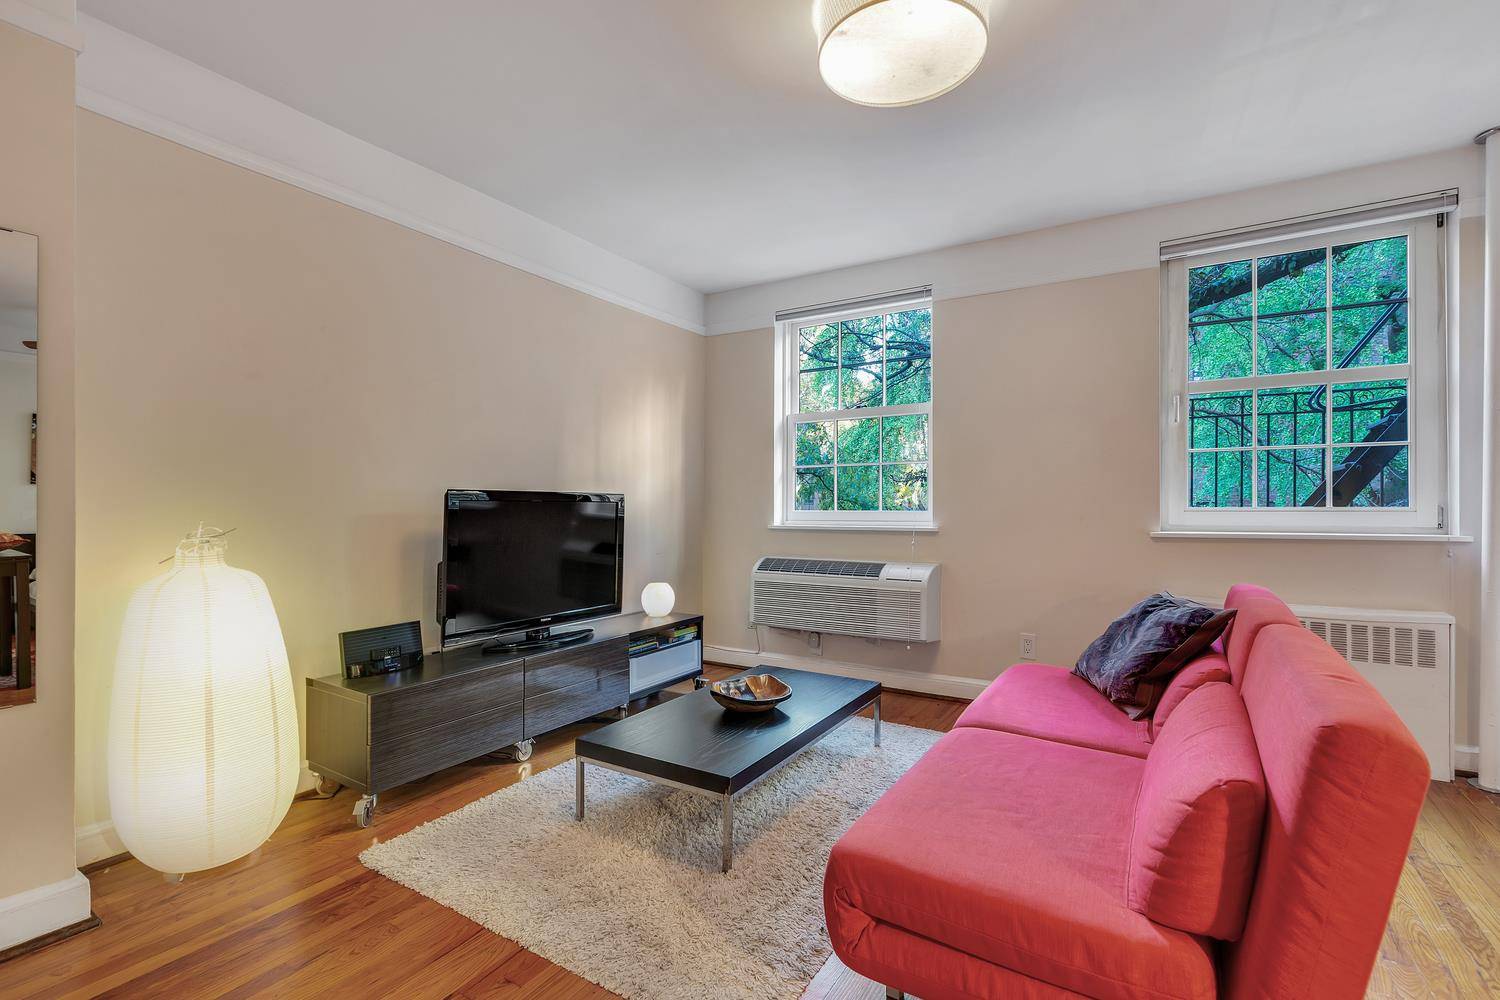 The Apartment Amazing opportunity to rent a beautifully furnished studio apartment in a historic Chelsea townhome !